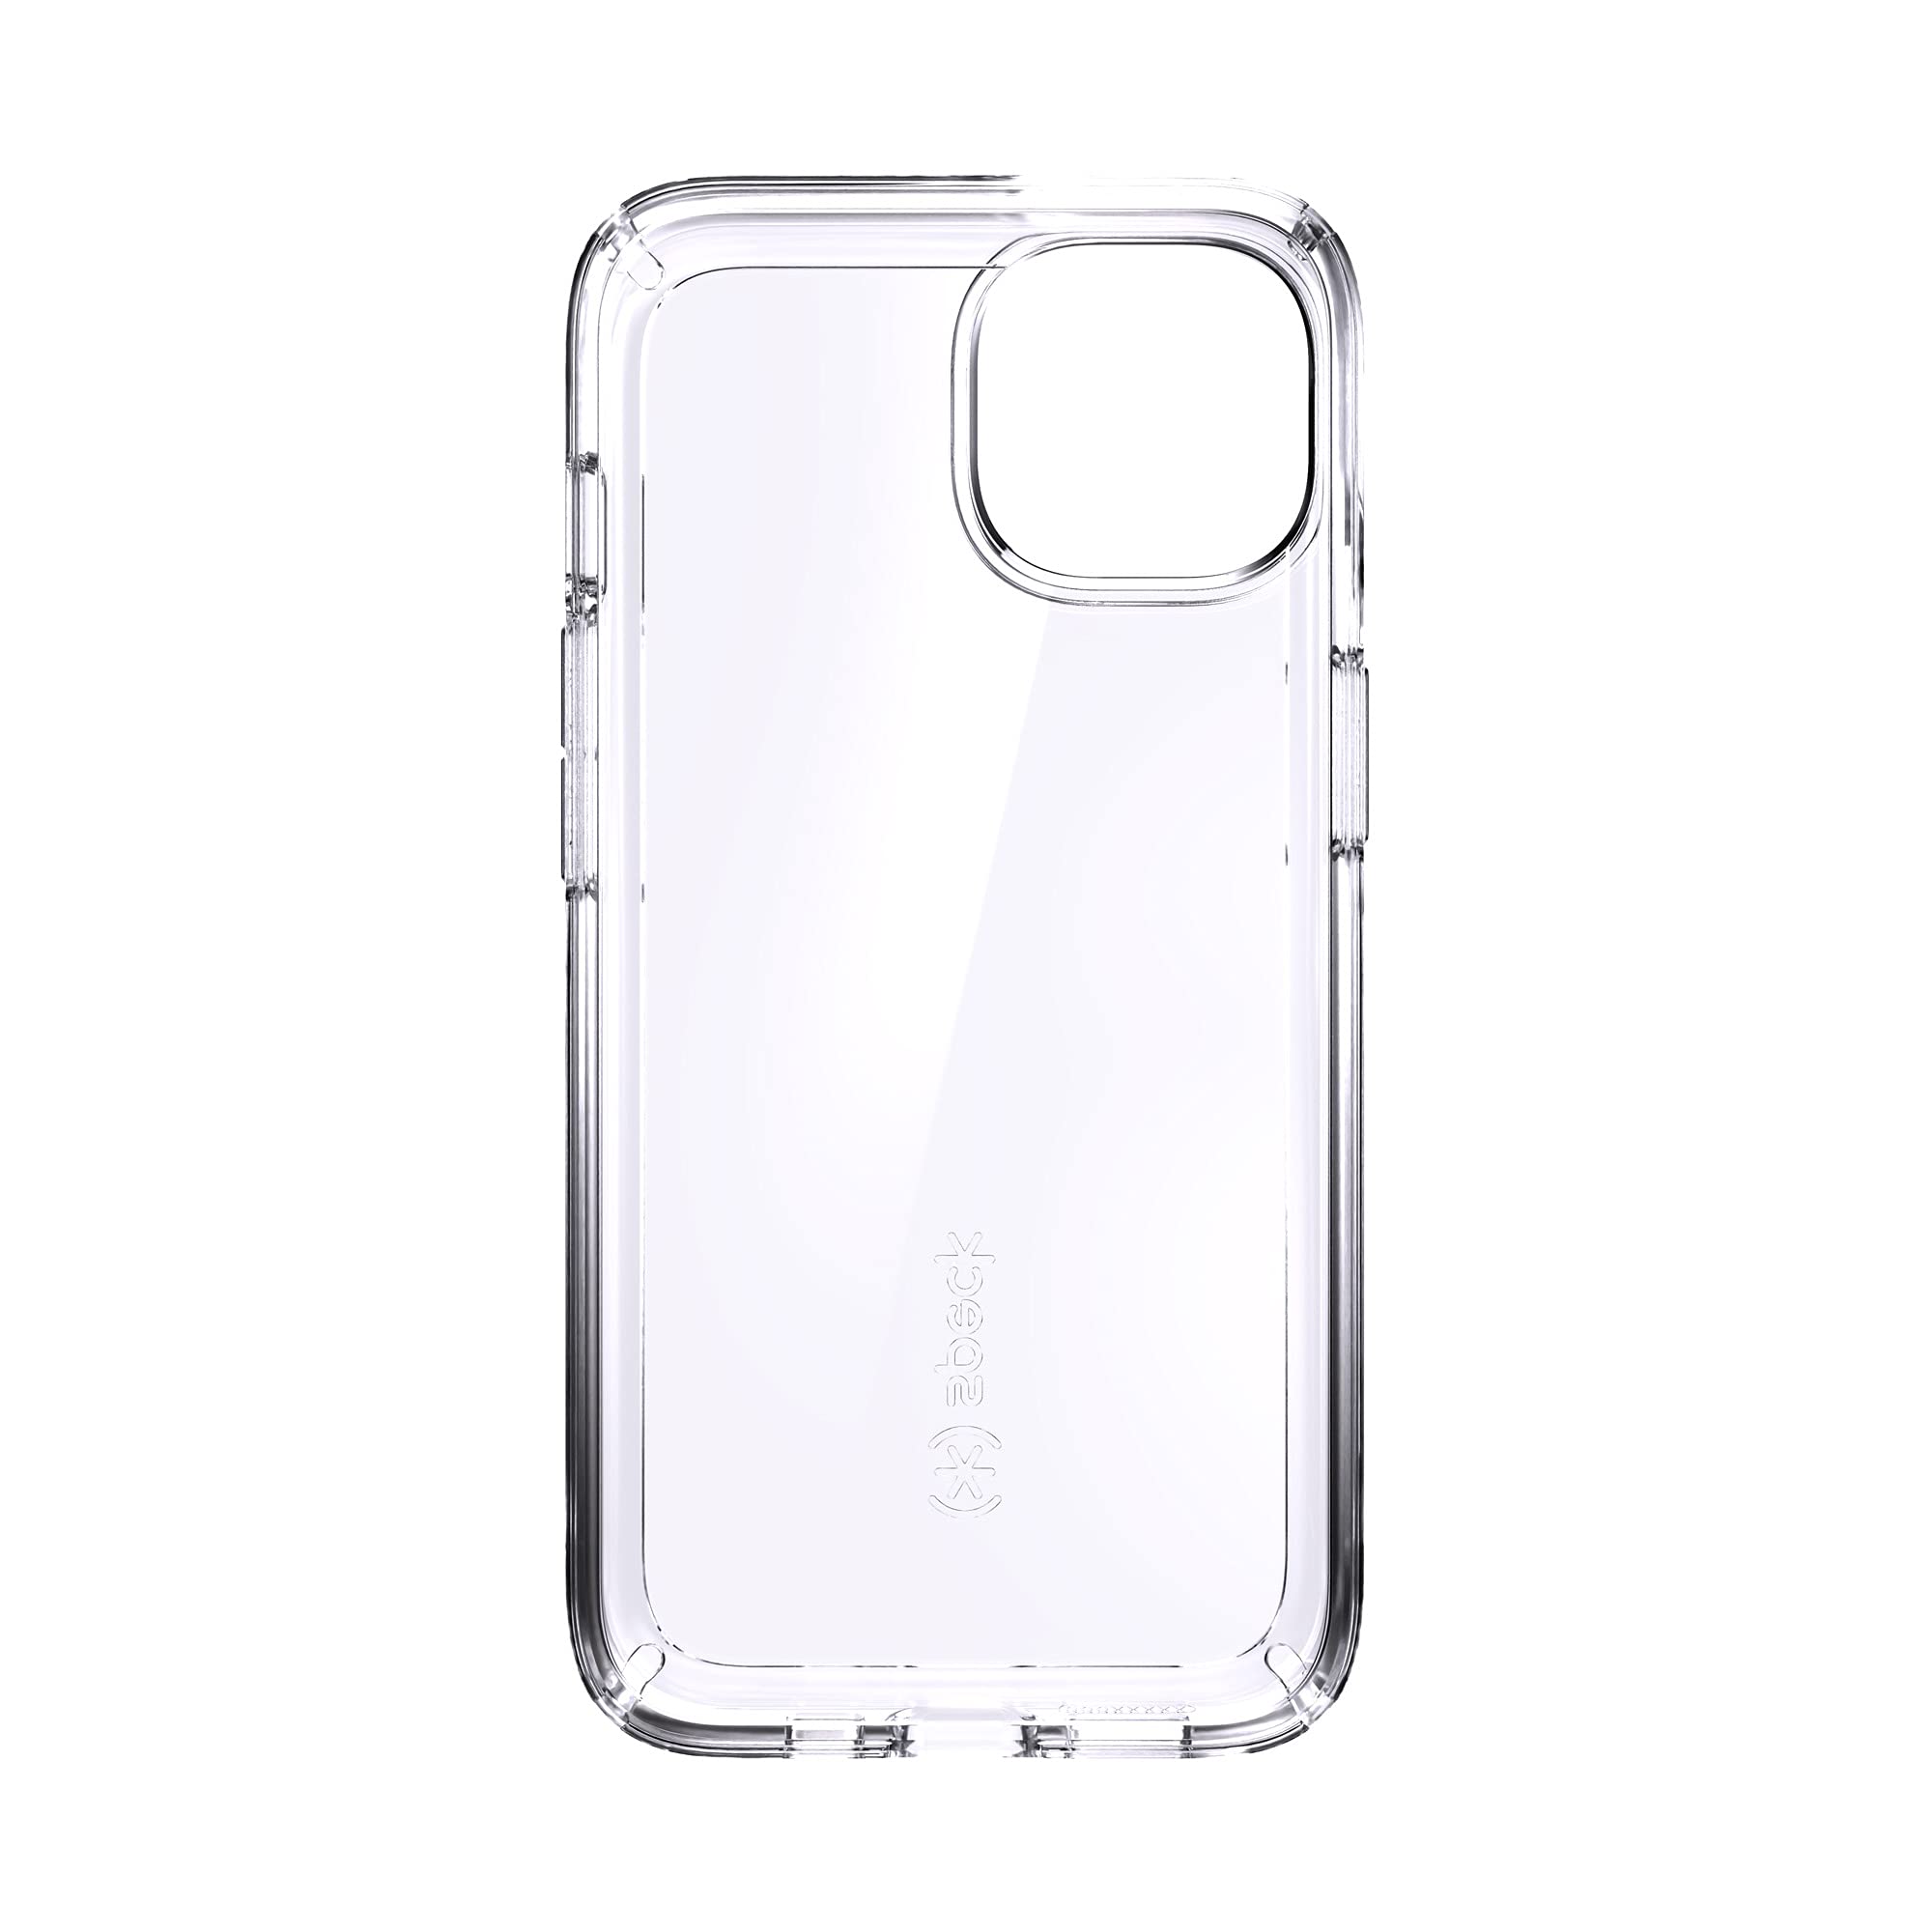 Speck iPhone 13 Clear Case - Drop Protection, Scratch Resistant iPhone 13 Case with Anti-Yellowing & Anti-Fade Slim, Dual Layer Design for 6.1 Inch Phones - Wireless Charging Compatible - GemShell